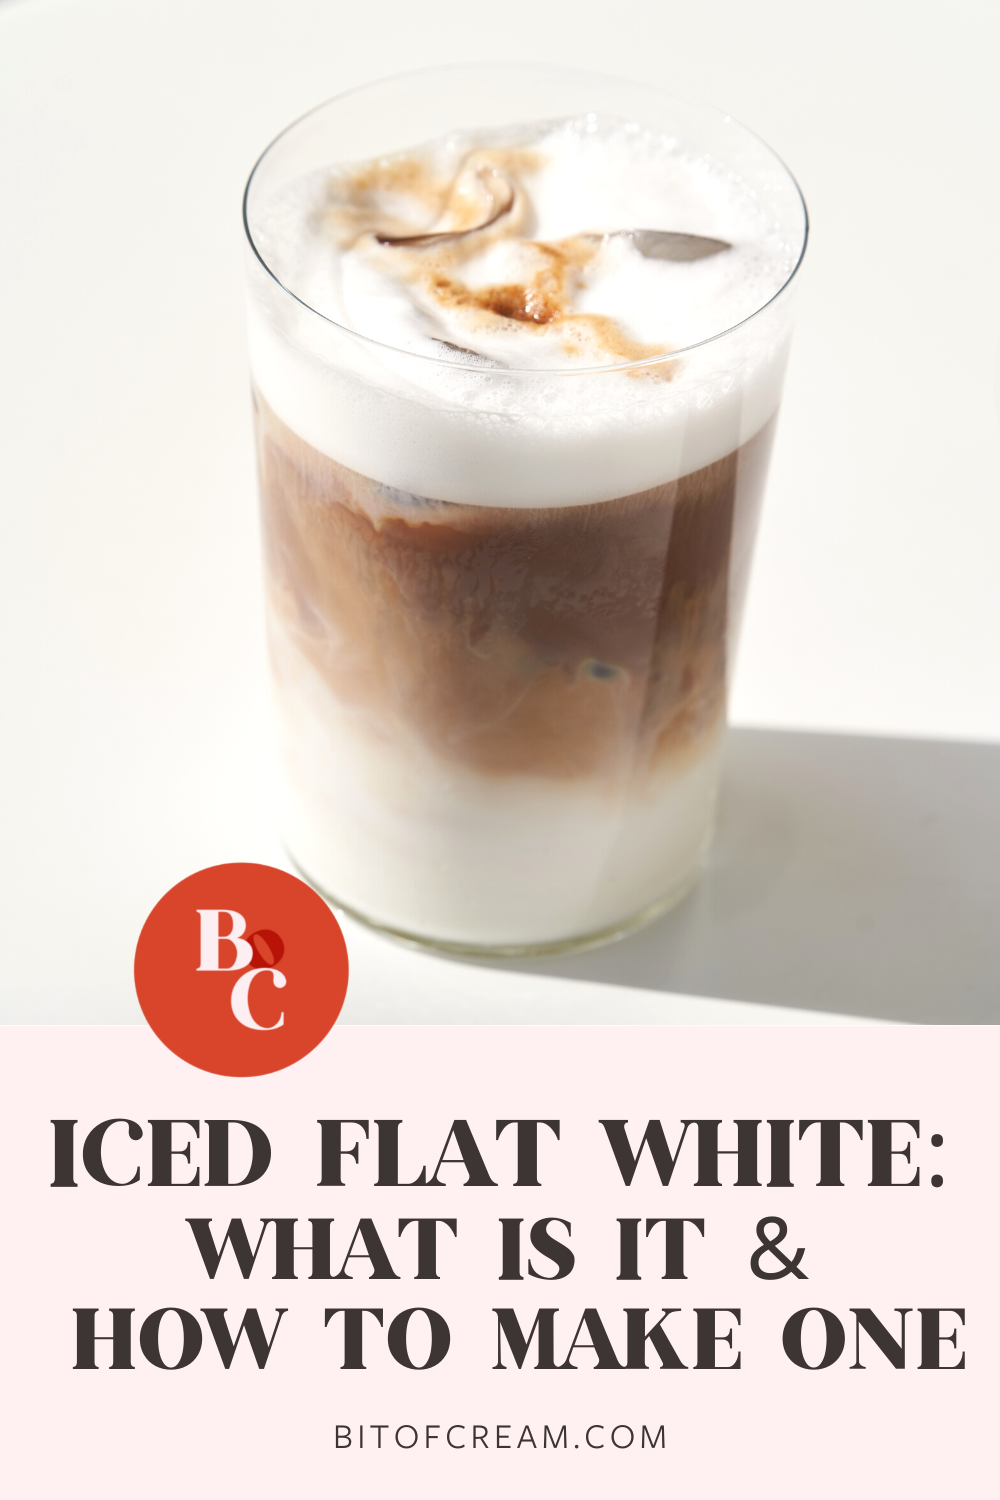 iced flat white - what is it and how to make one